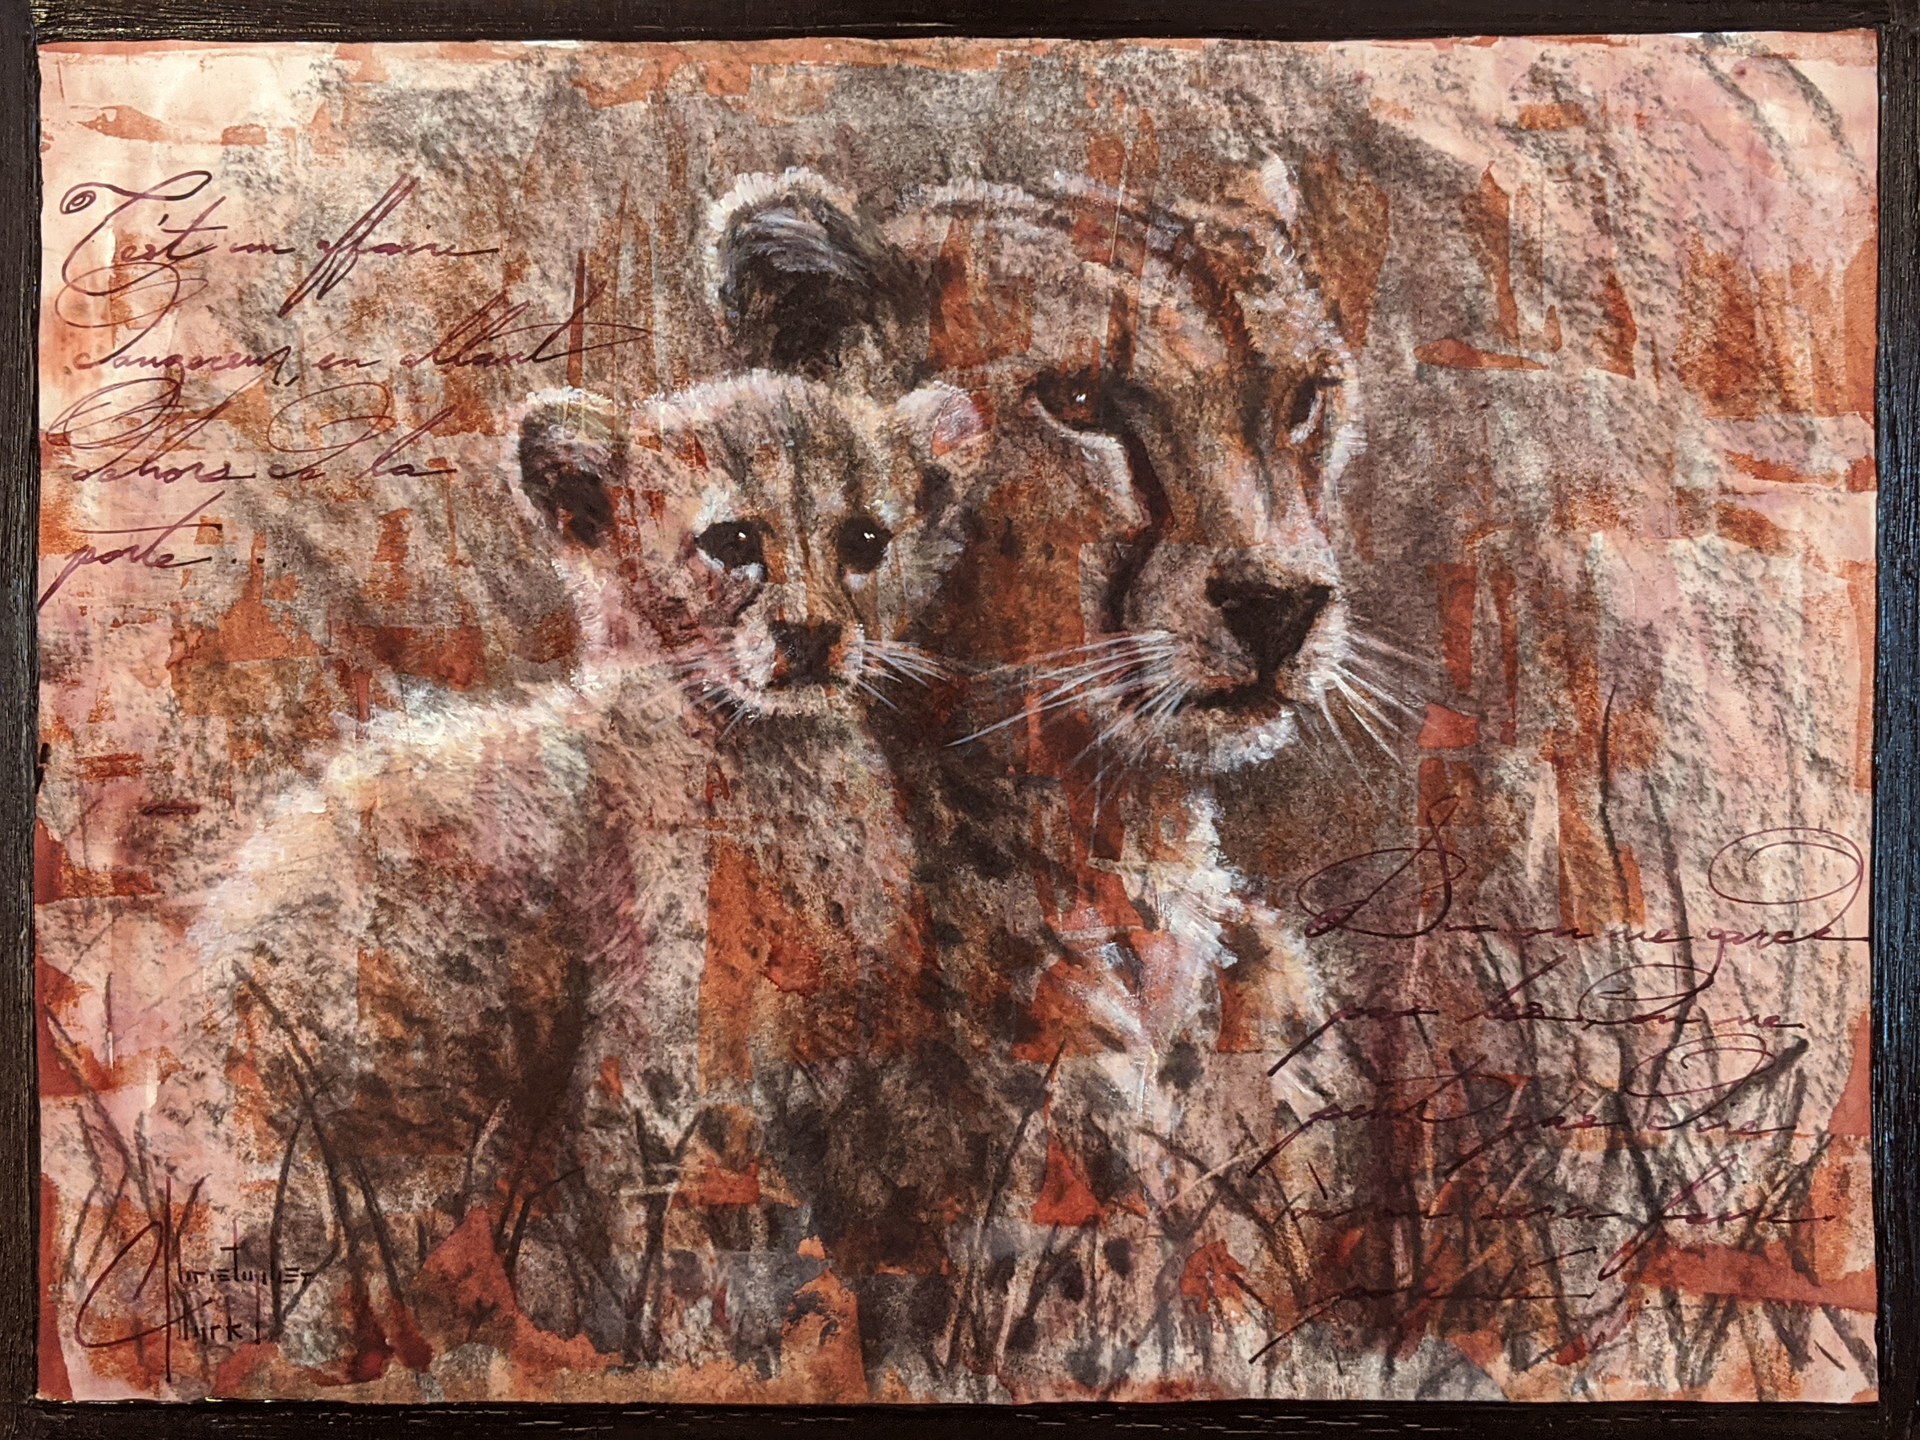 Sepia Cats, Cheetahs by Christopher Clark